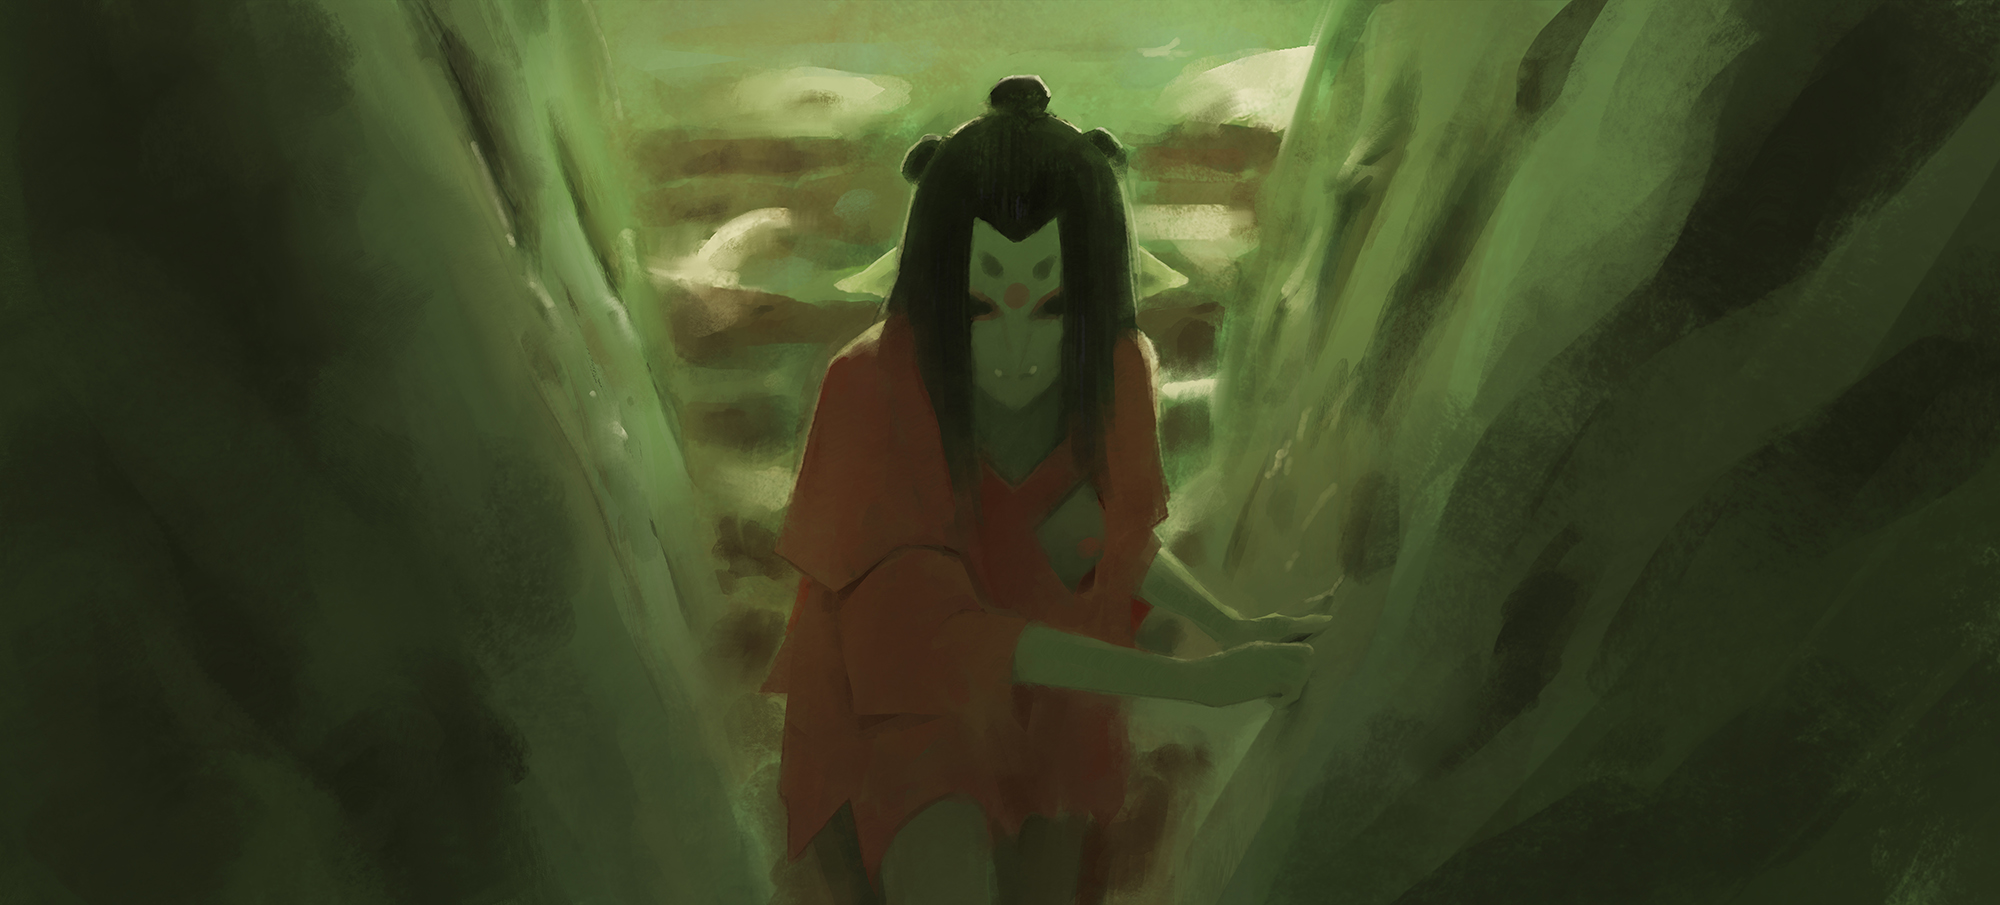 shaman character in orange red clothing and three buns in hair framed left and right by greenery